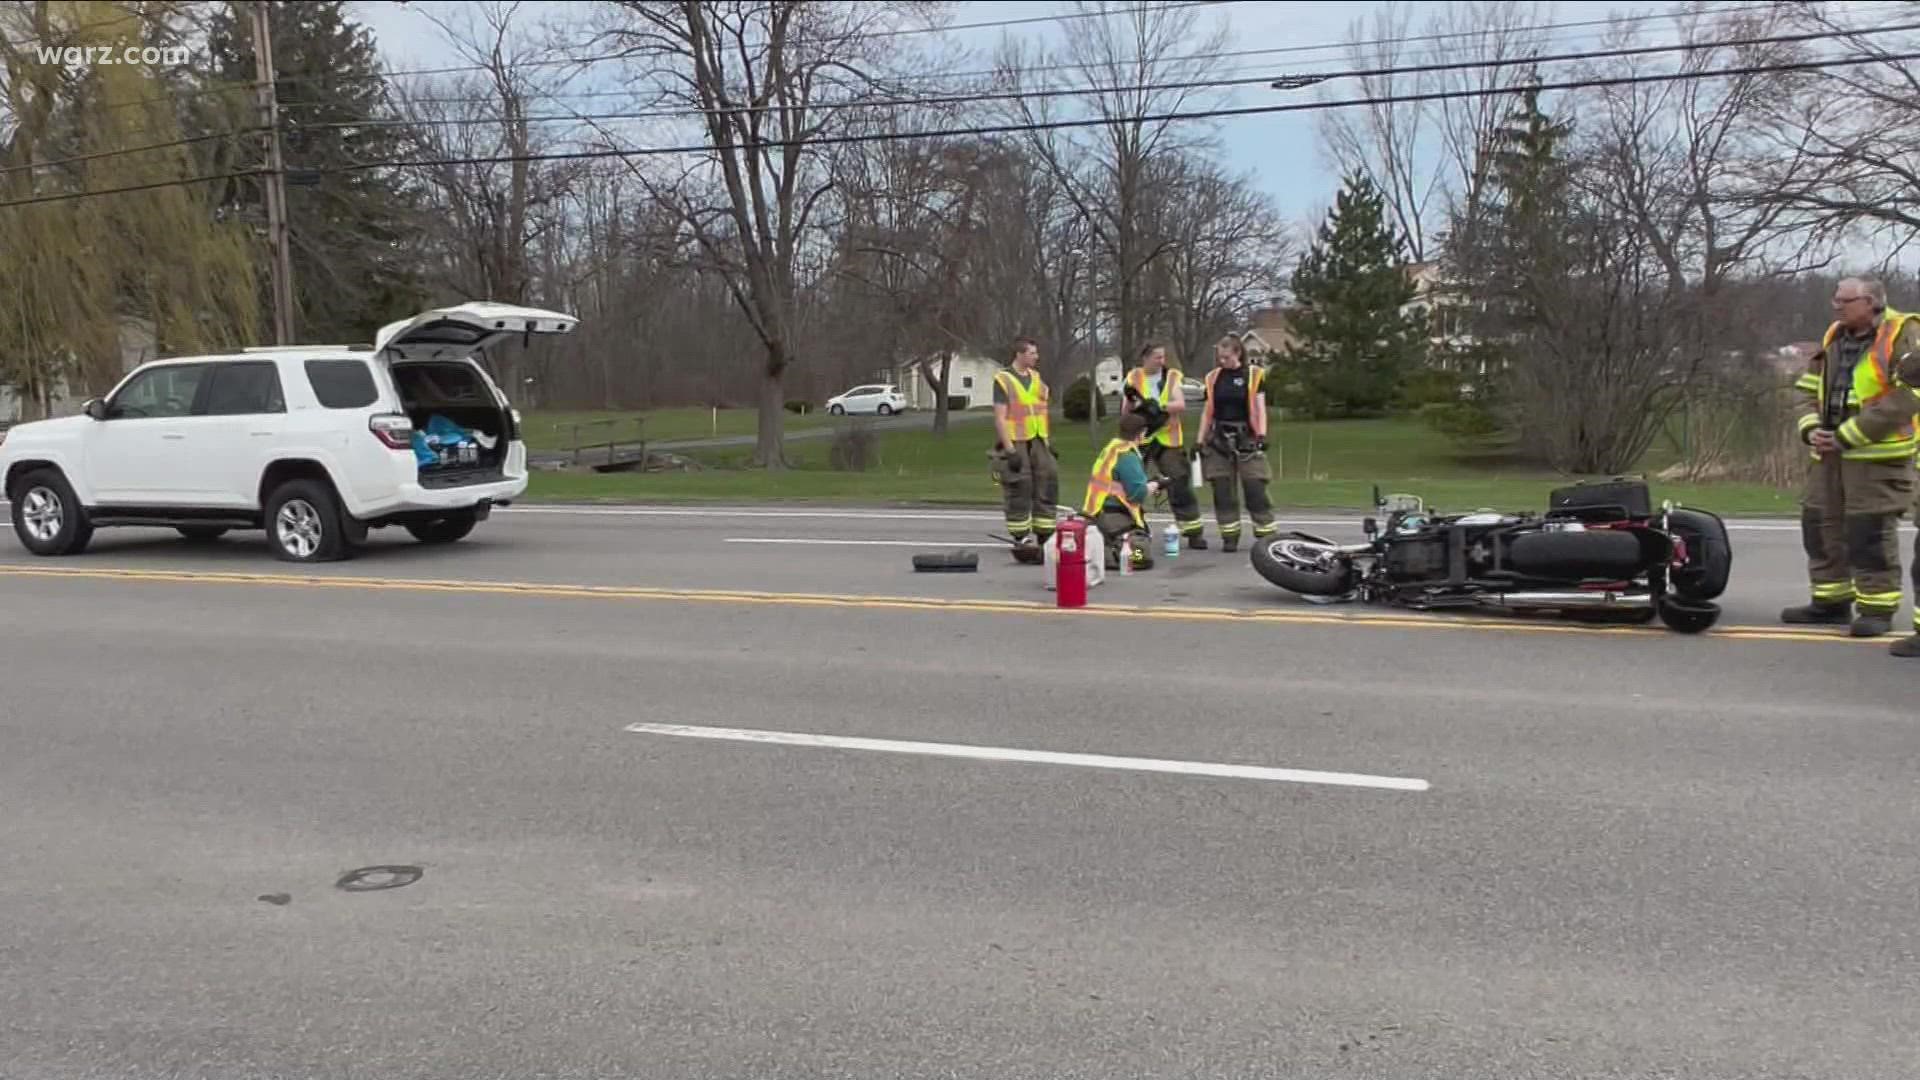 Police released the name of the man killed in a motorcycle crash yesterday in the town of Wheatfield.